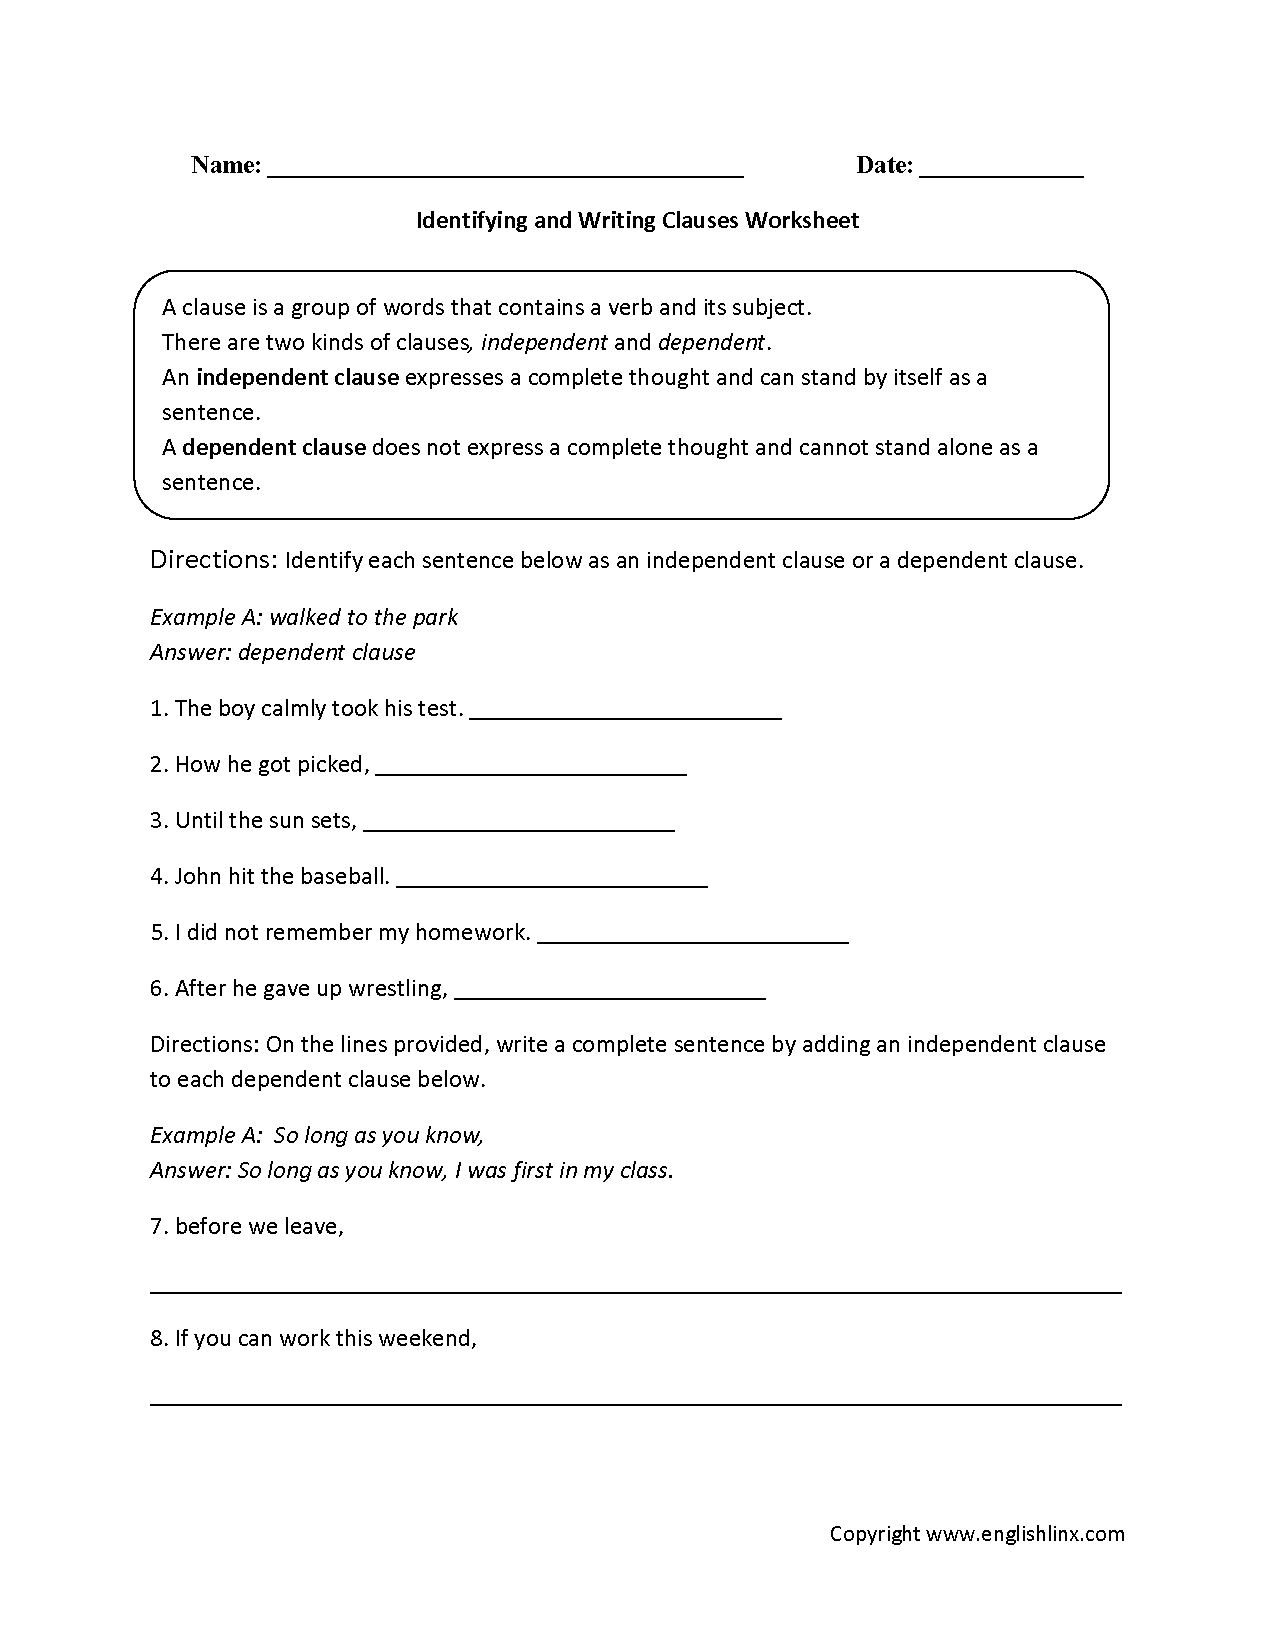 adjective-and-adverb-clauses-worksheet-8th-grade-adverbworksheets